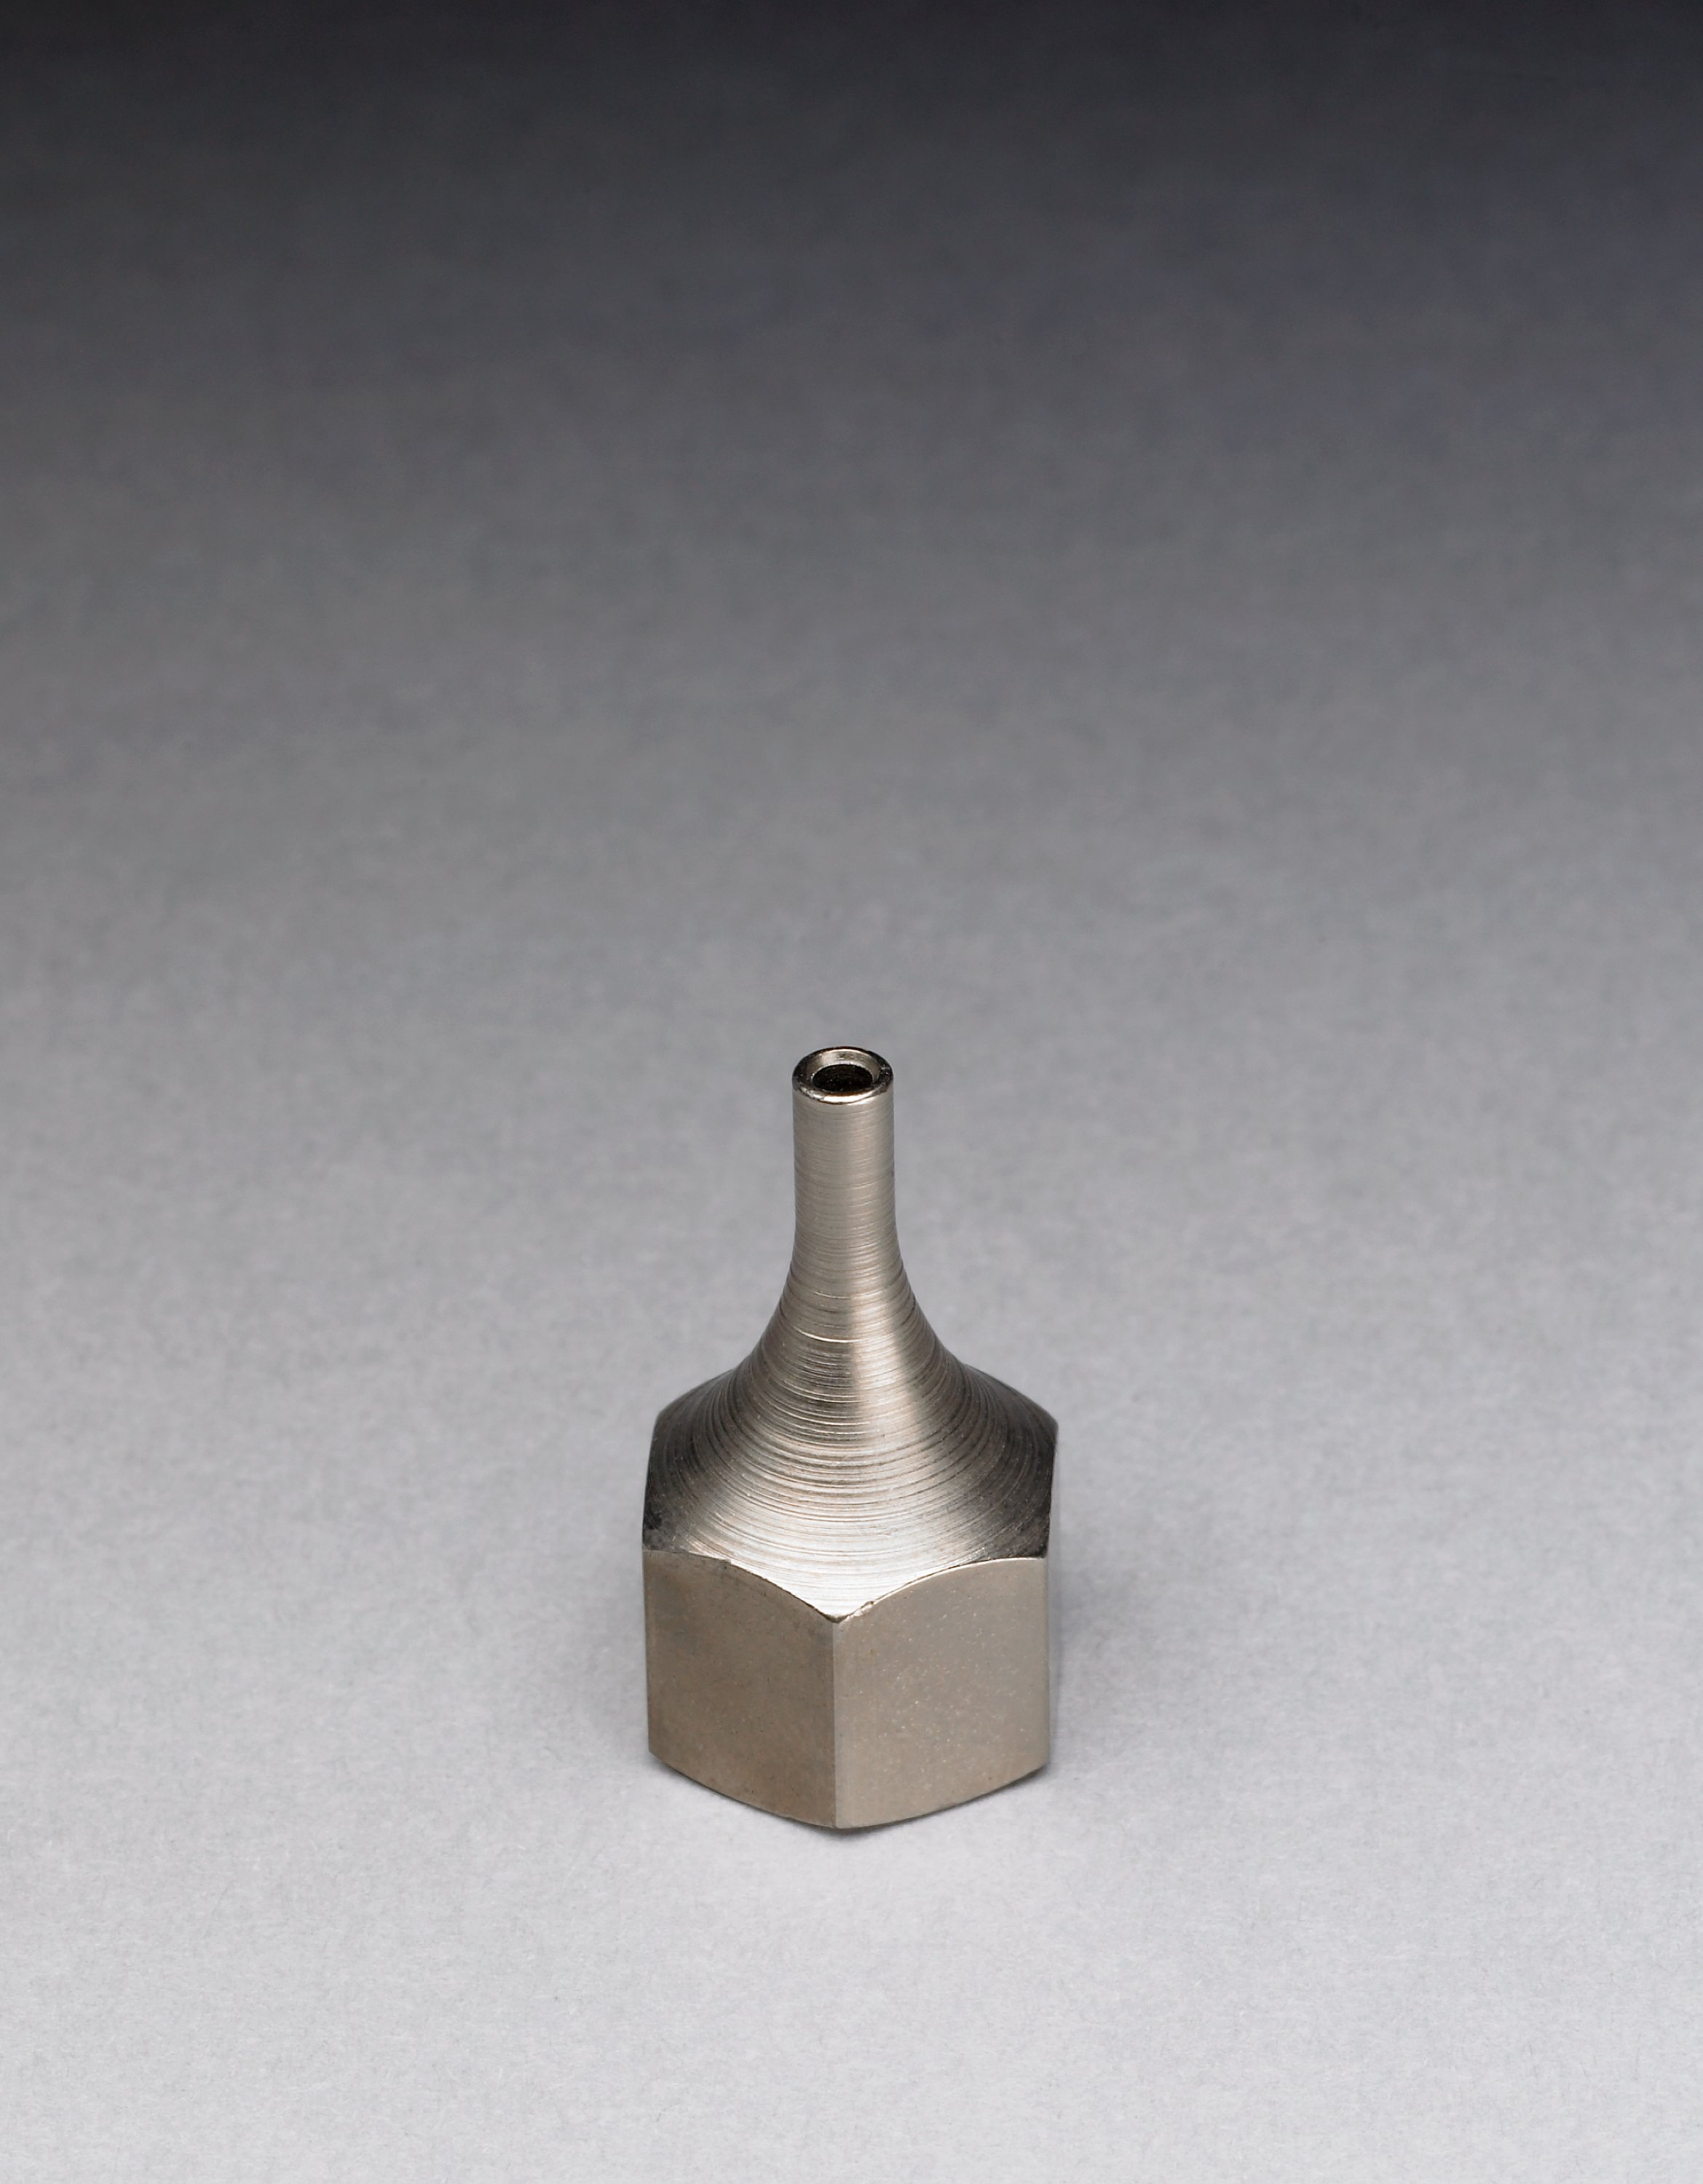 A mini aluminum tip designed to provide a precise and controlled flow of hot melt into hard-to-reach areas, including corners.